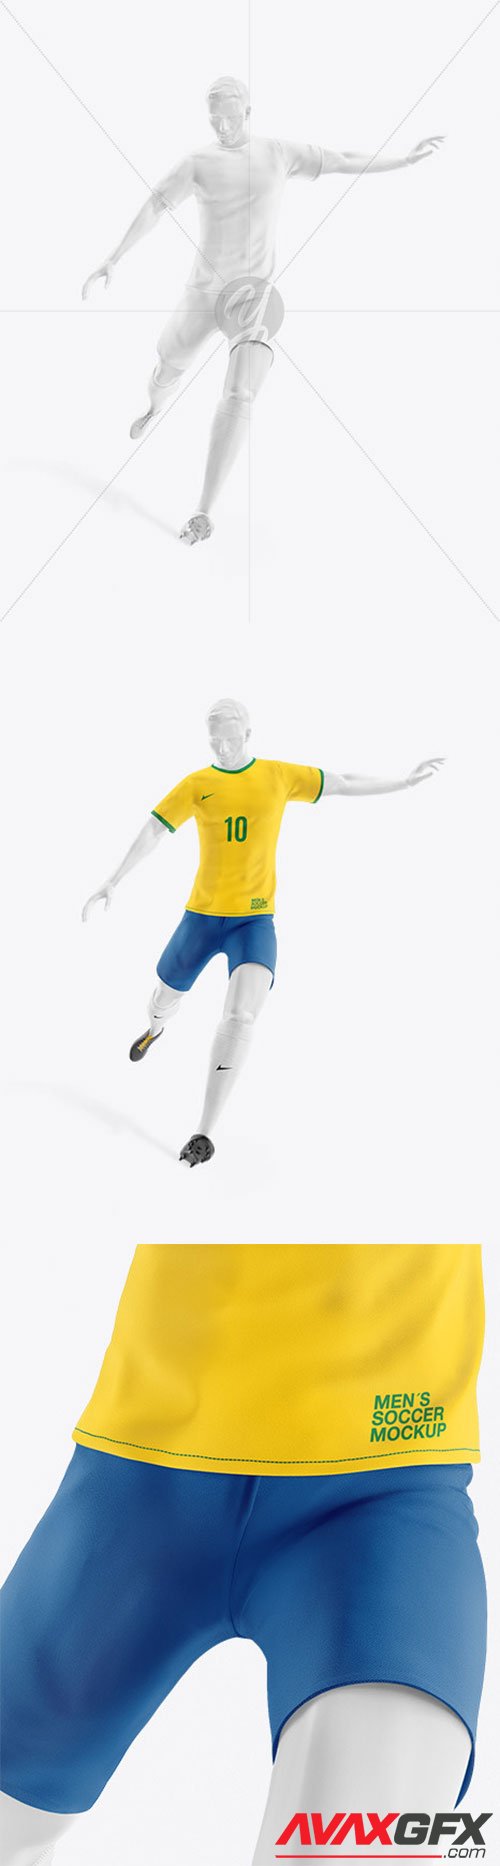 Soccer Team Kit Mockup with Mannequin - Front View 62414